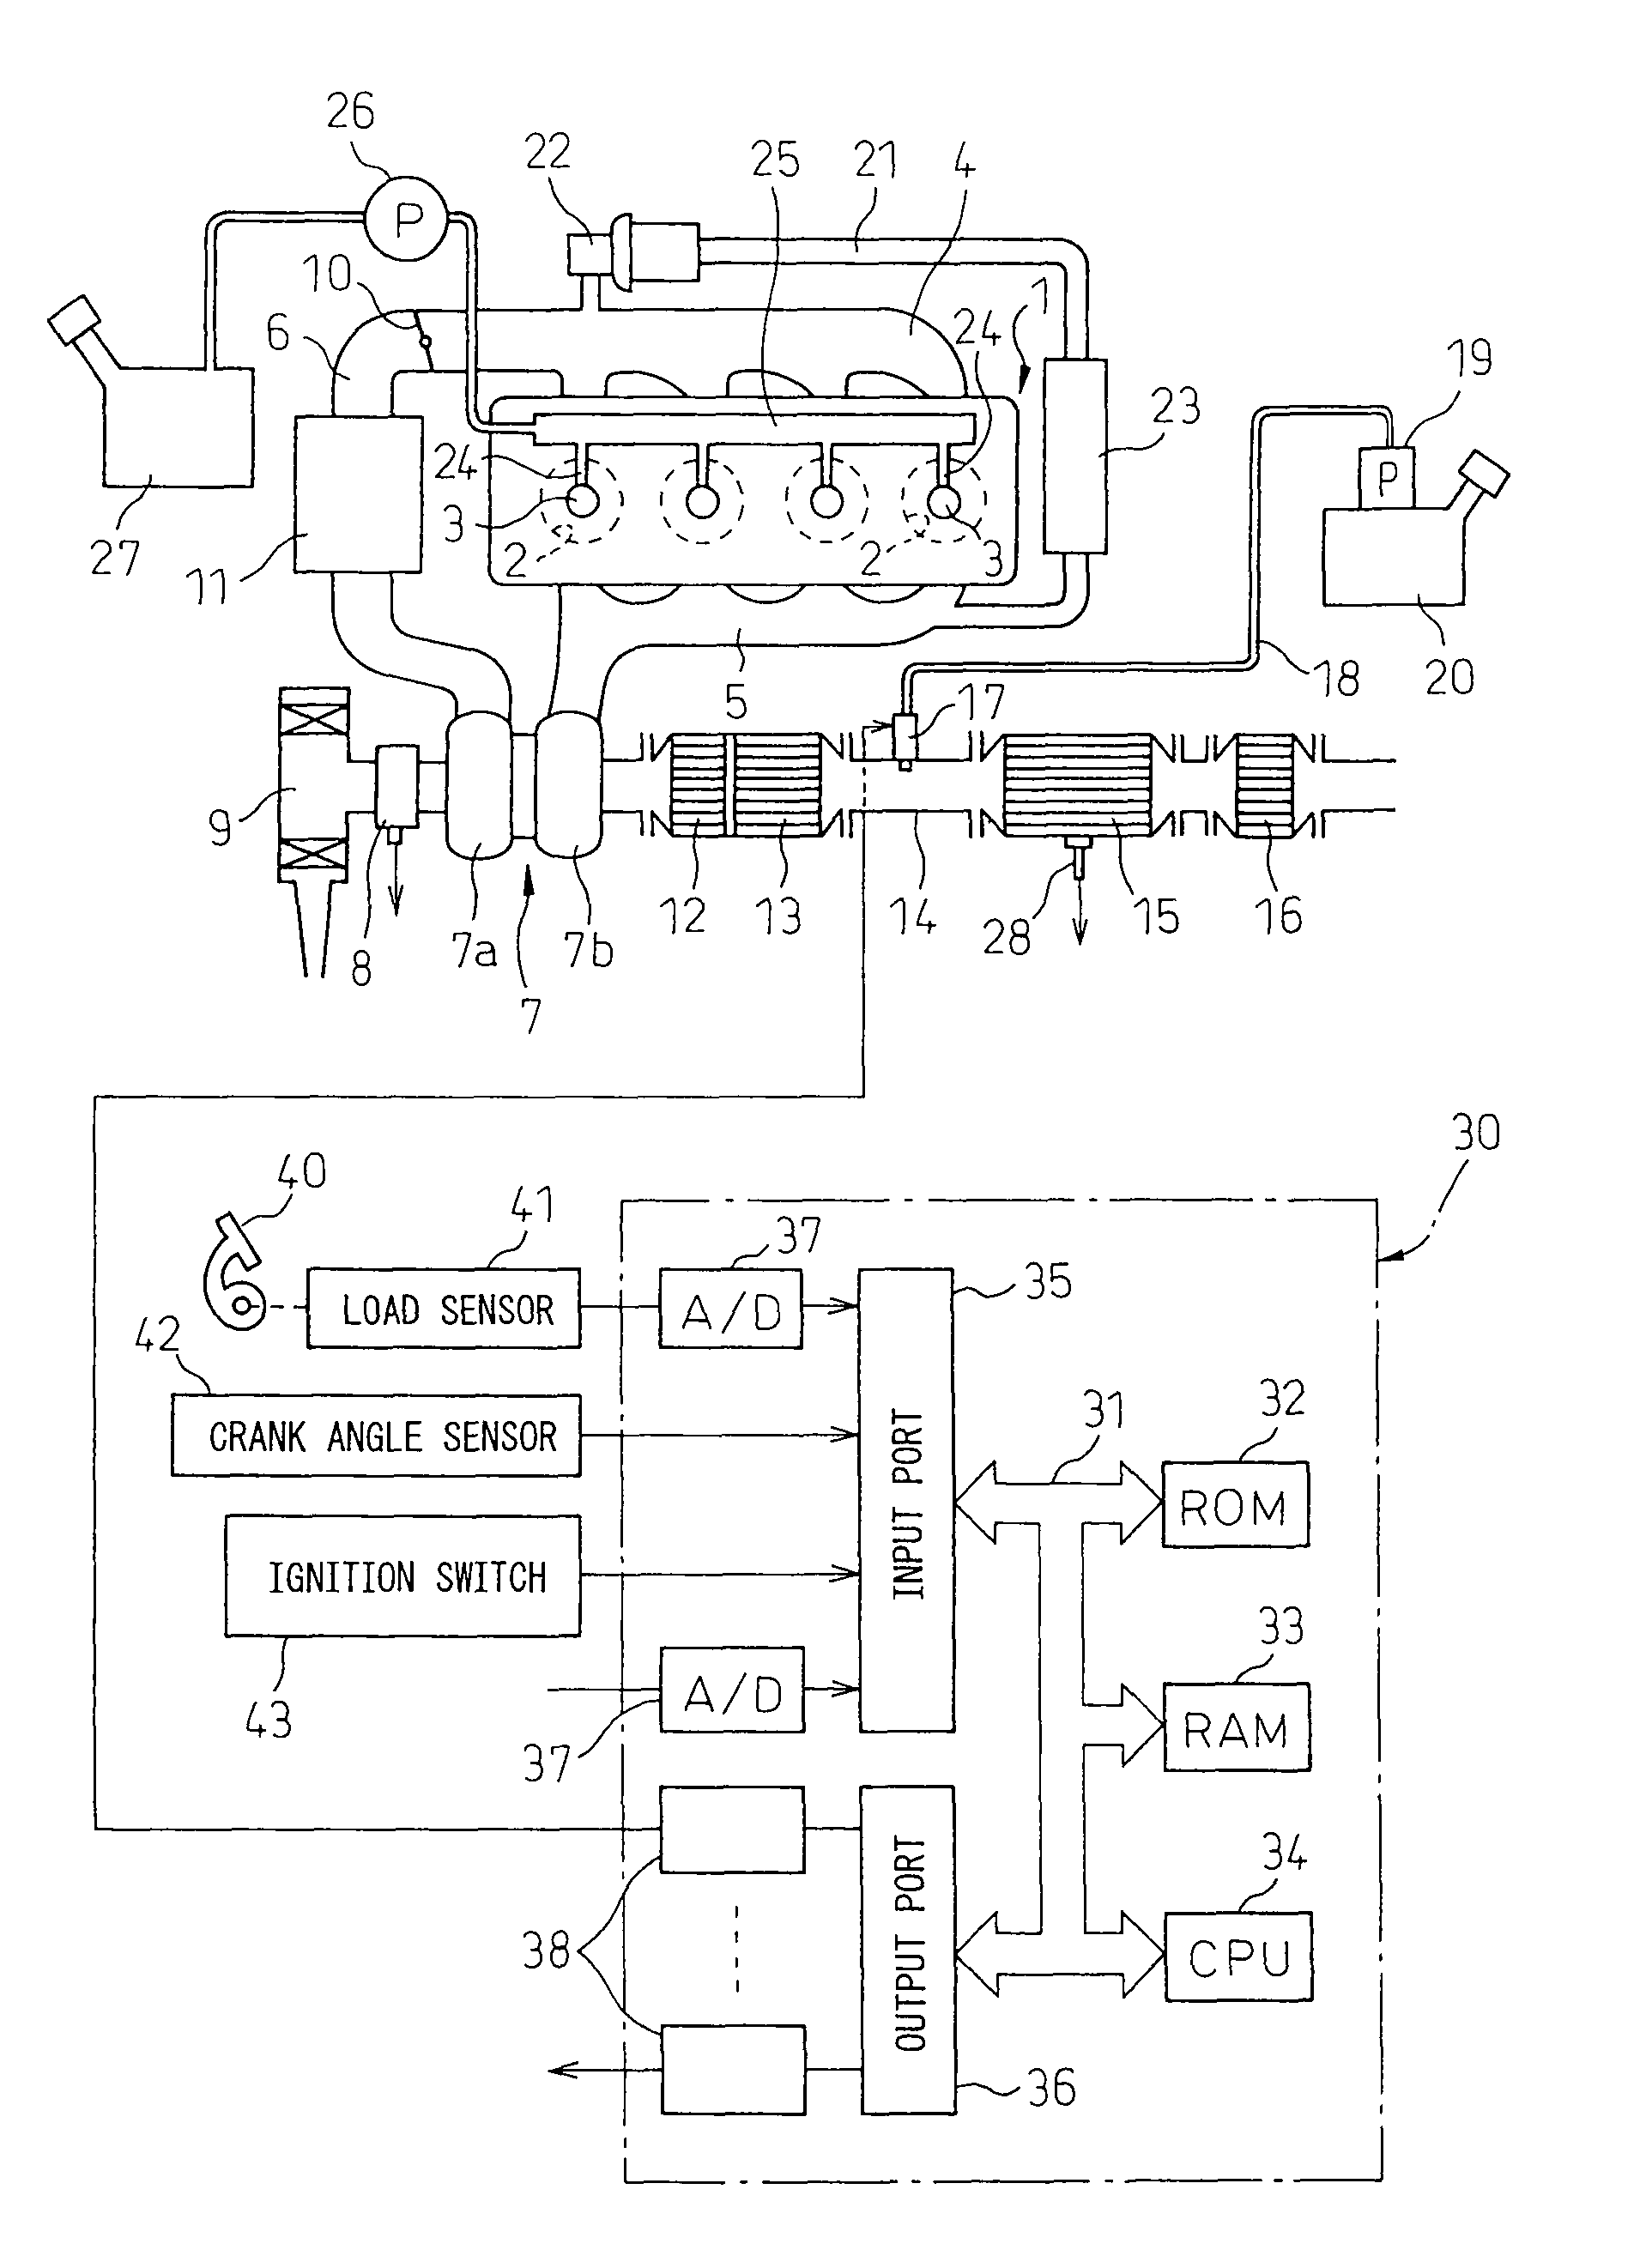 Exhaust purification device of internal combustion engine